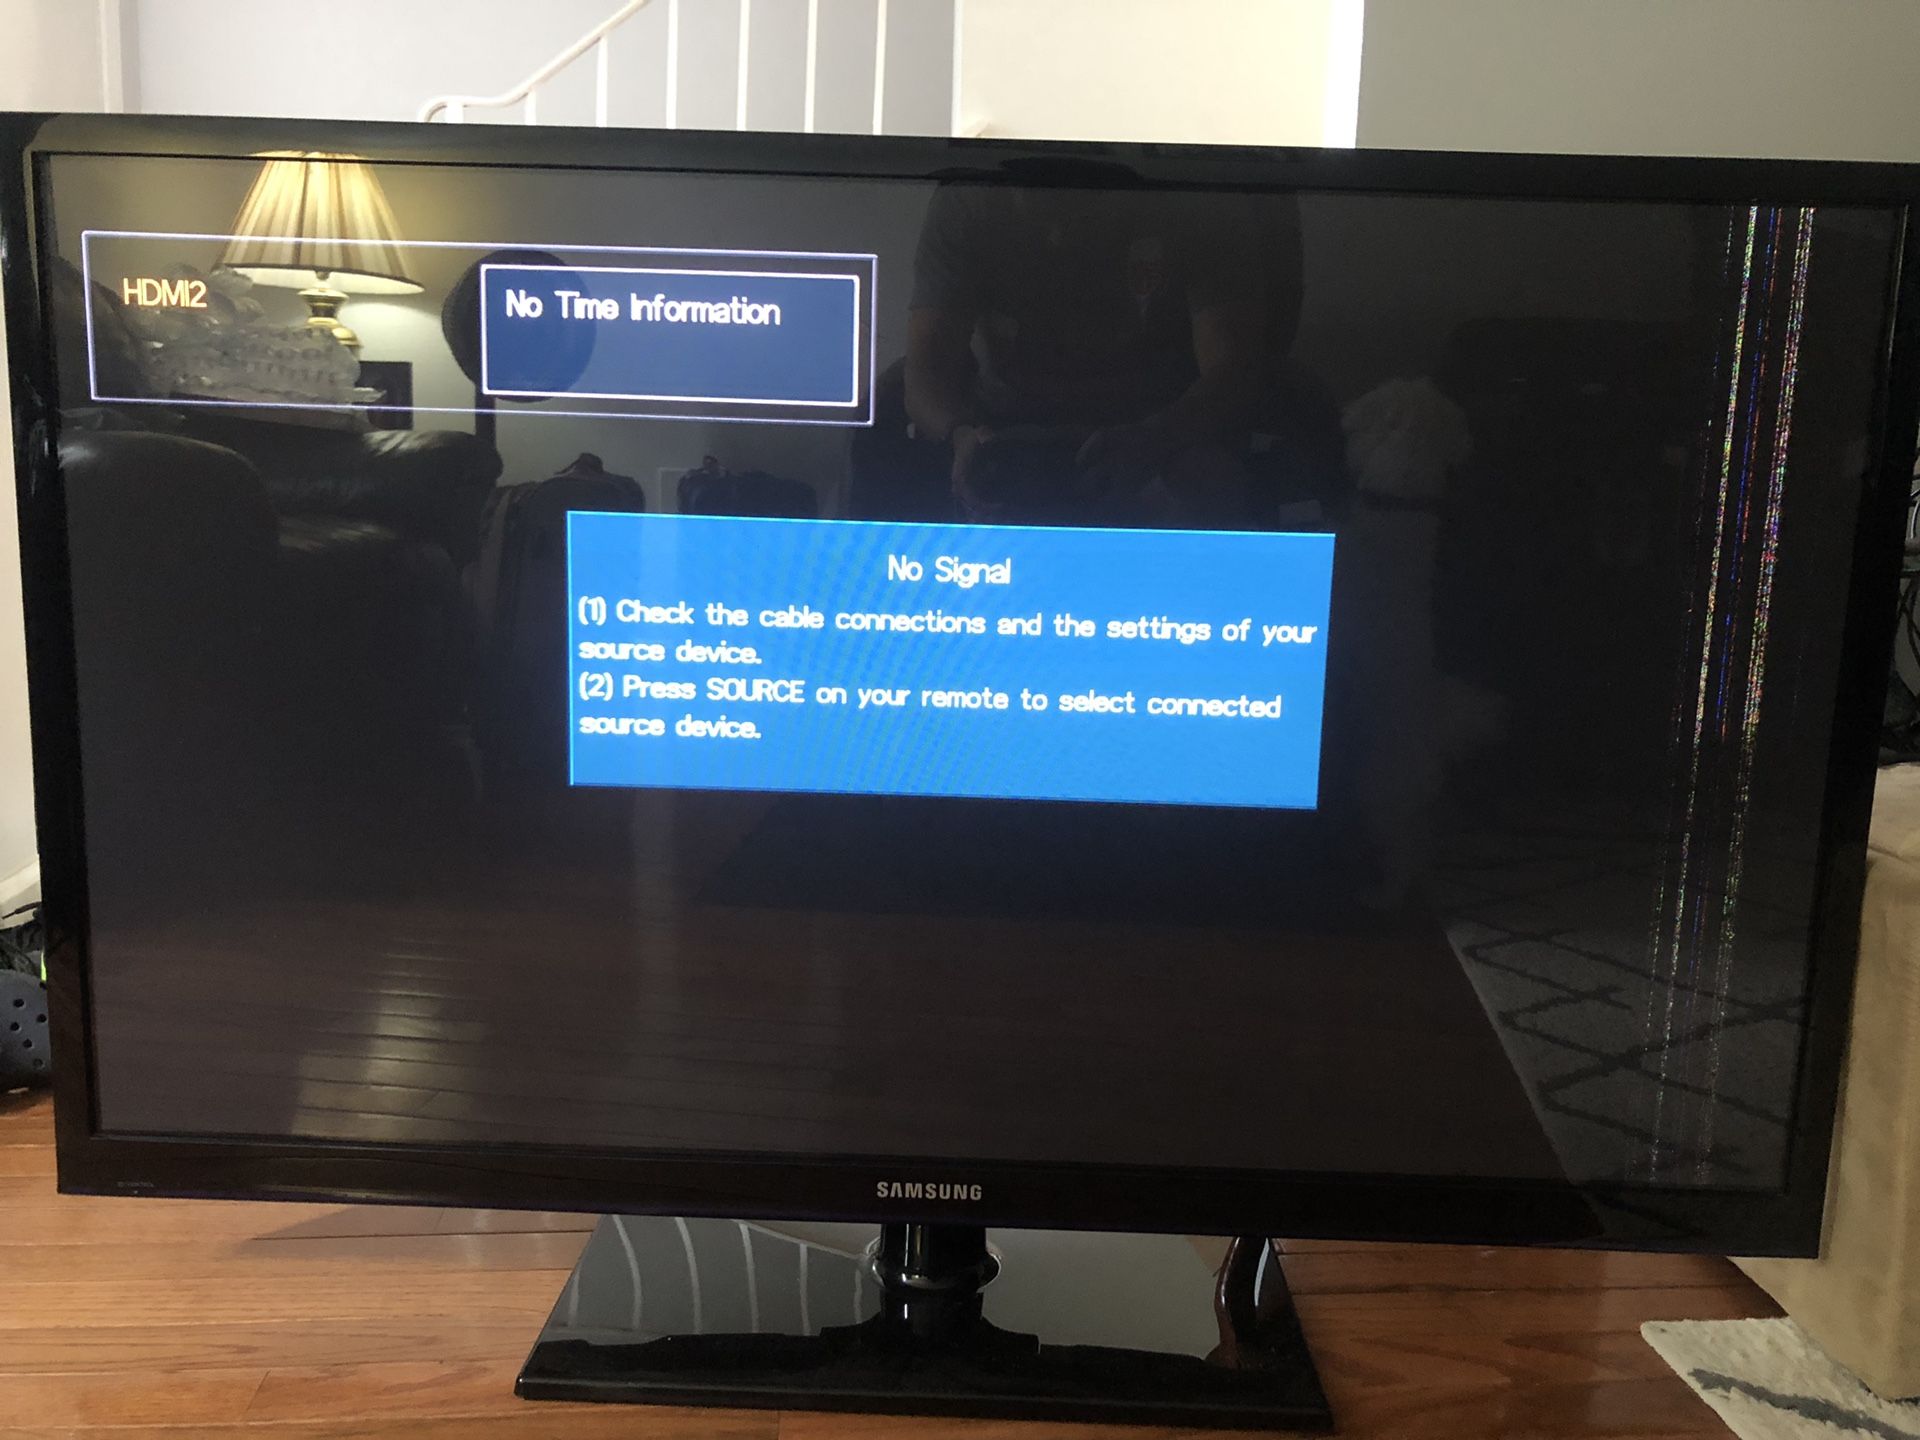 Samsung 51 inch plasma TV - fully functioning except with streaking